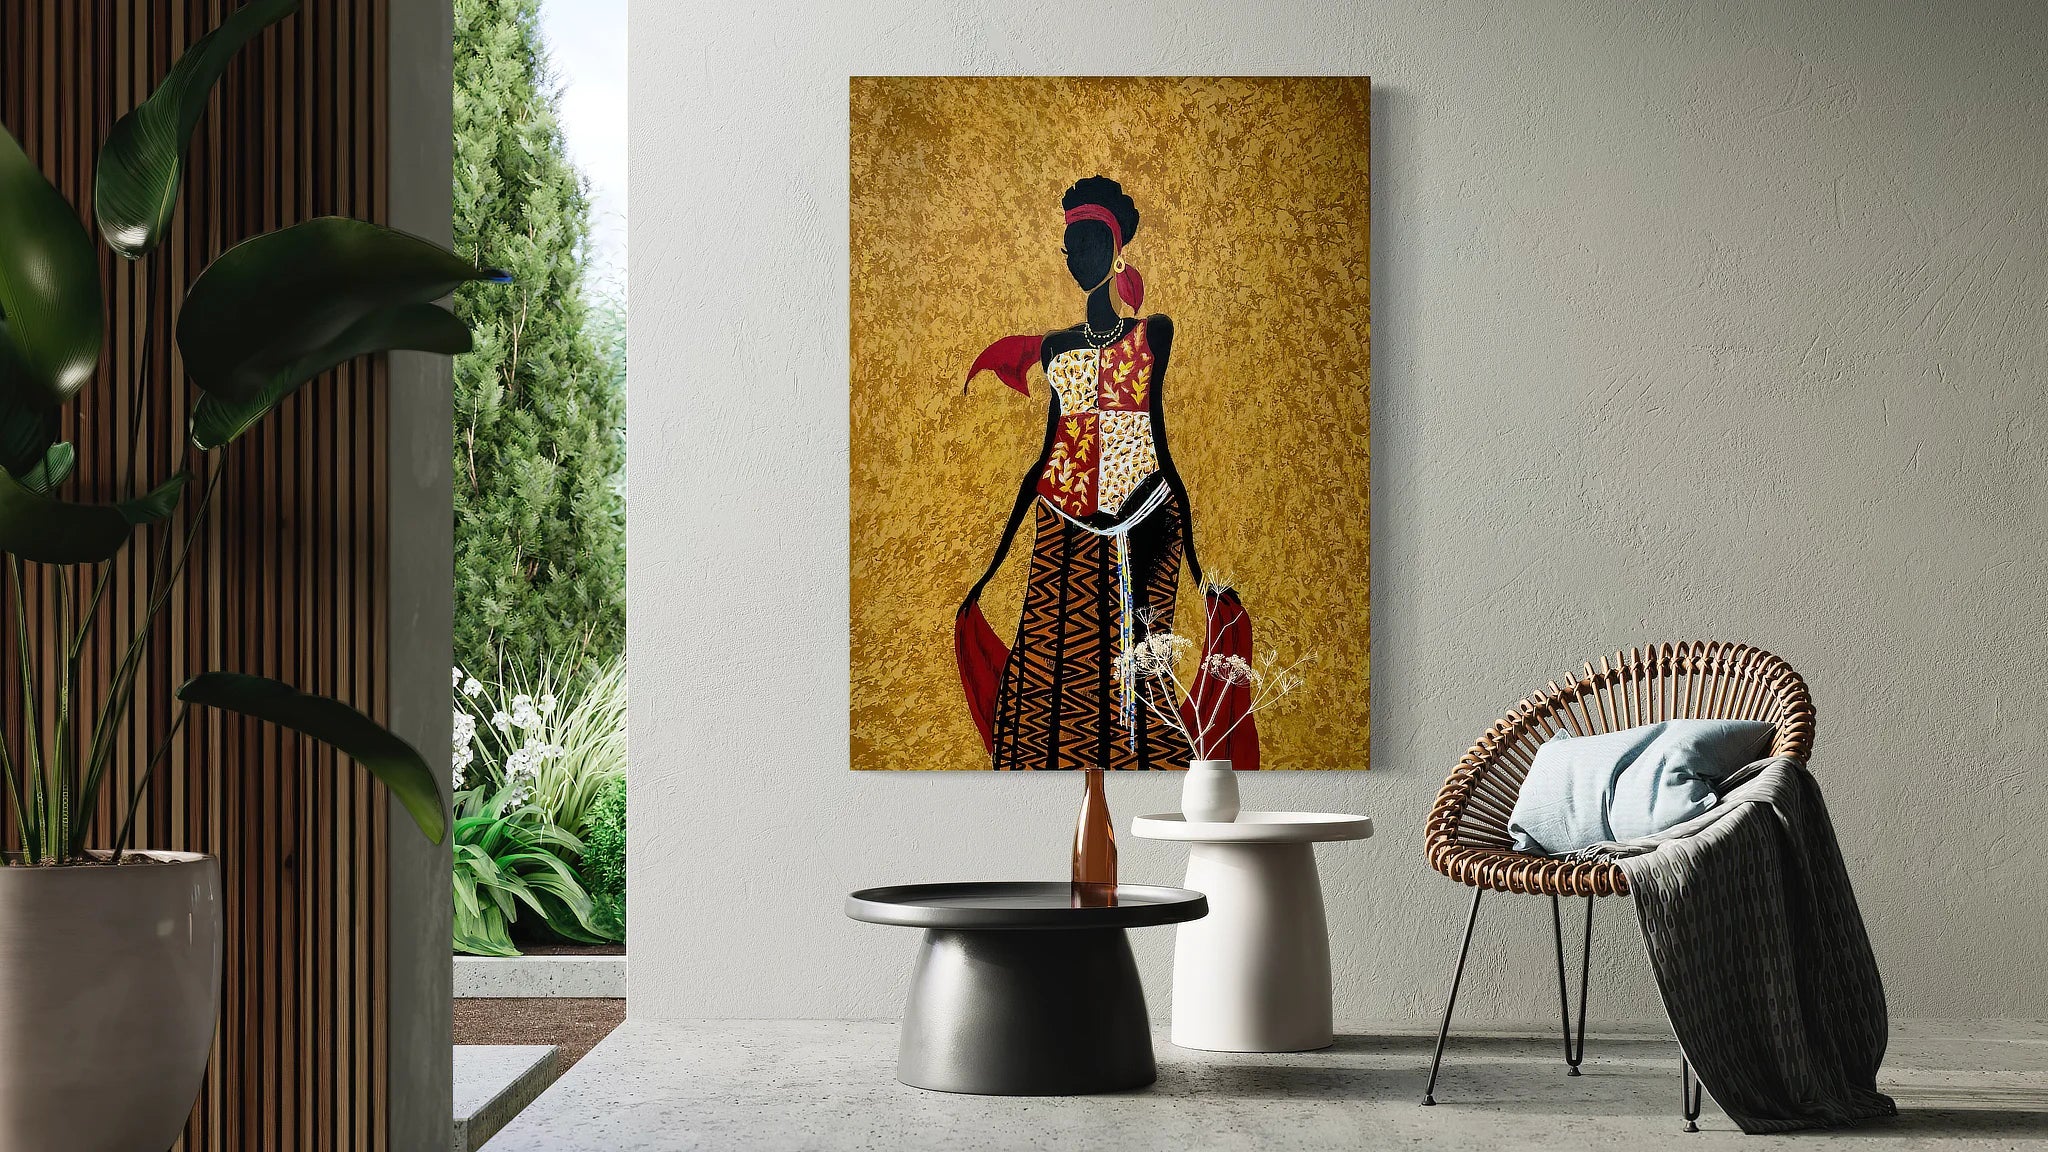 ChromaLuxe® | HD Metal print by Sonia Malboeuf hanging outside by a patio.